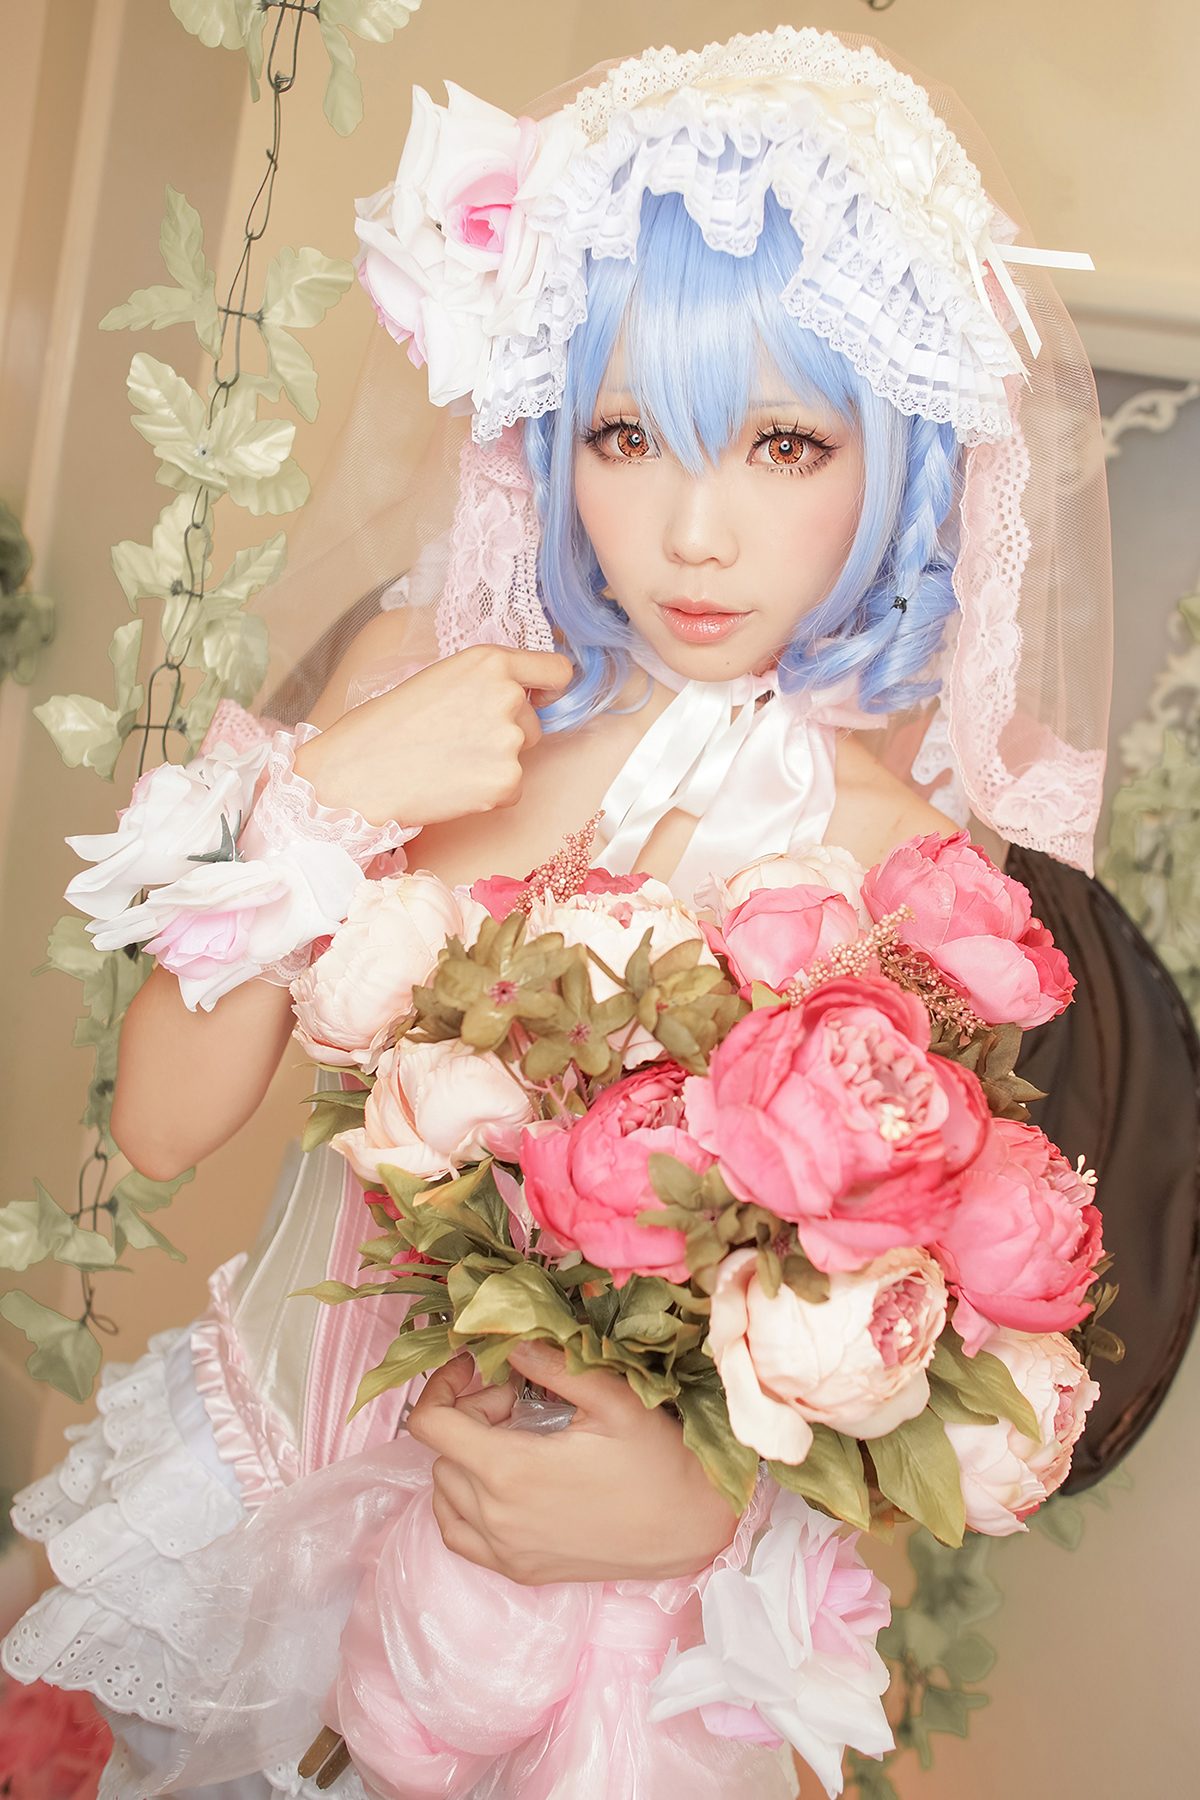 View - Coser@Ely_eee ElyEE子 - 蕾米莉亚·斯卡雷特 B - 